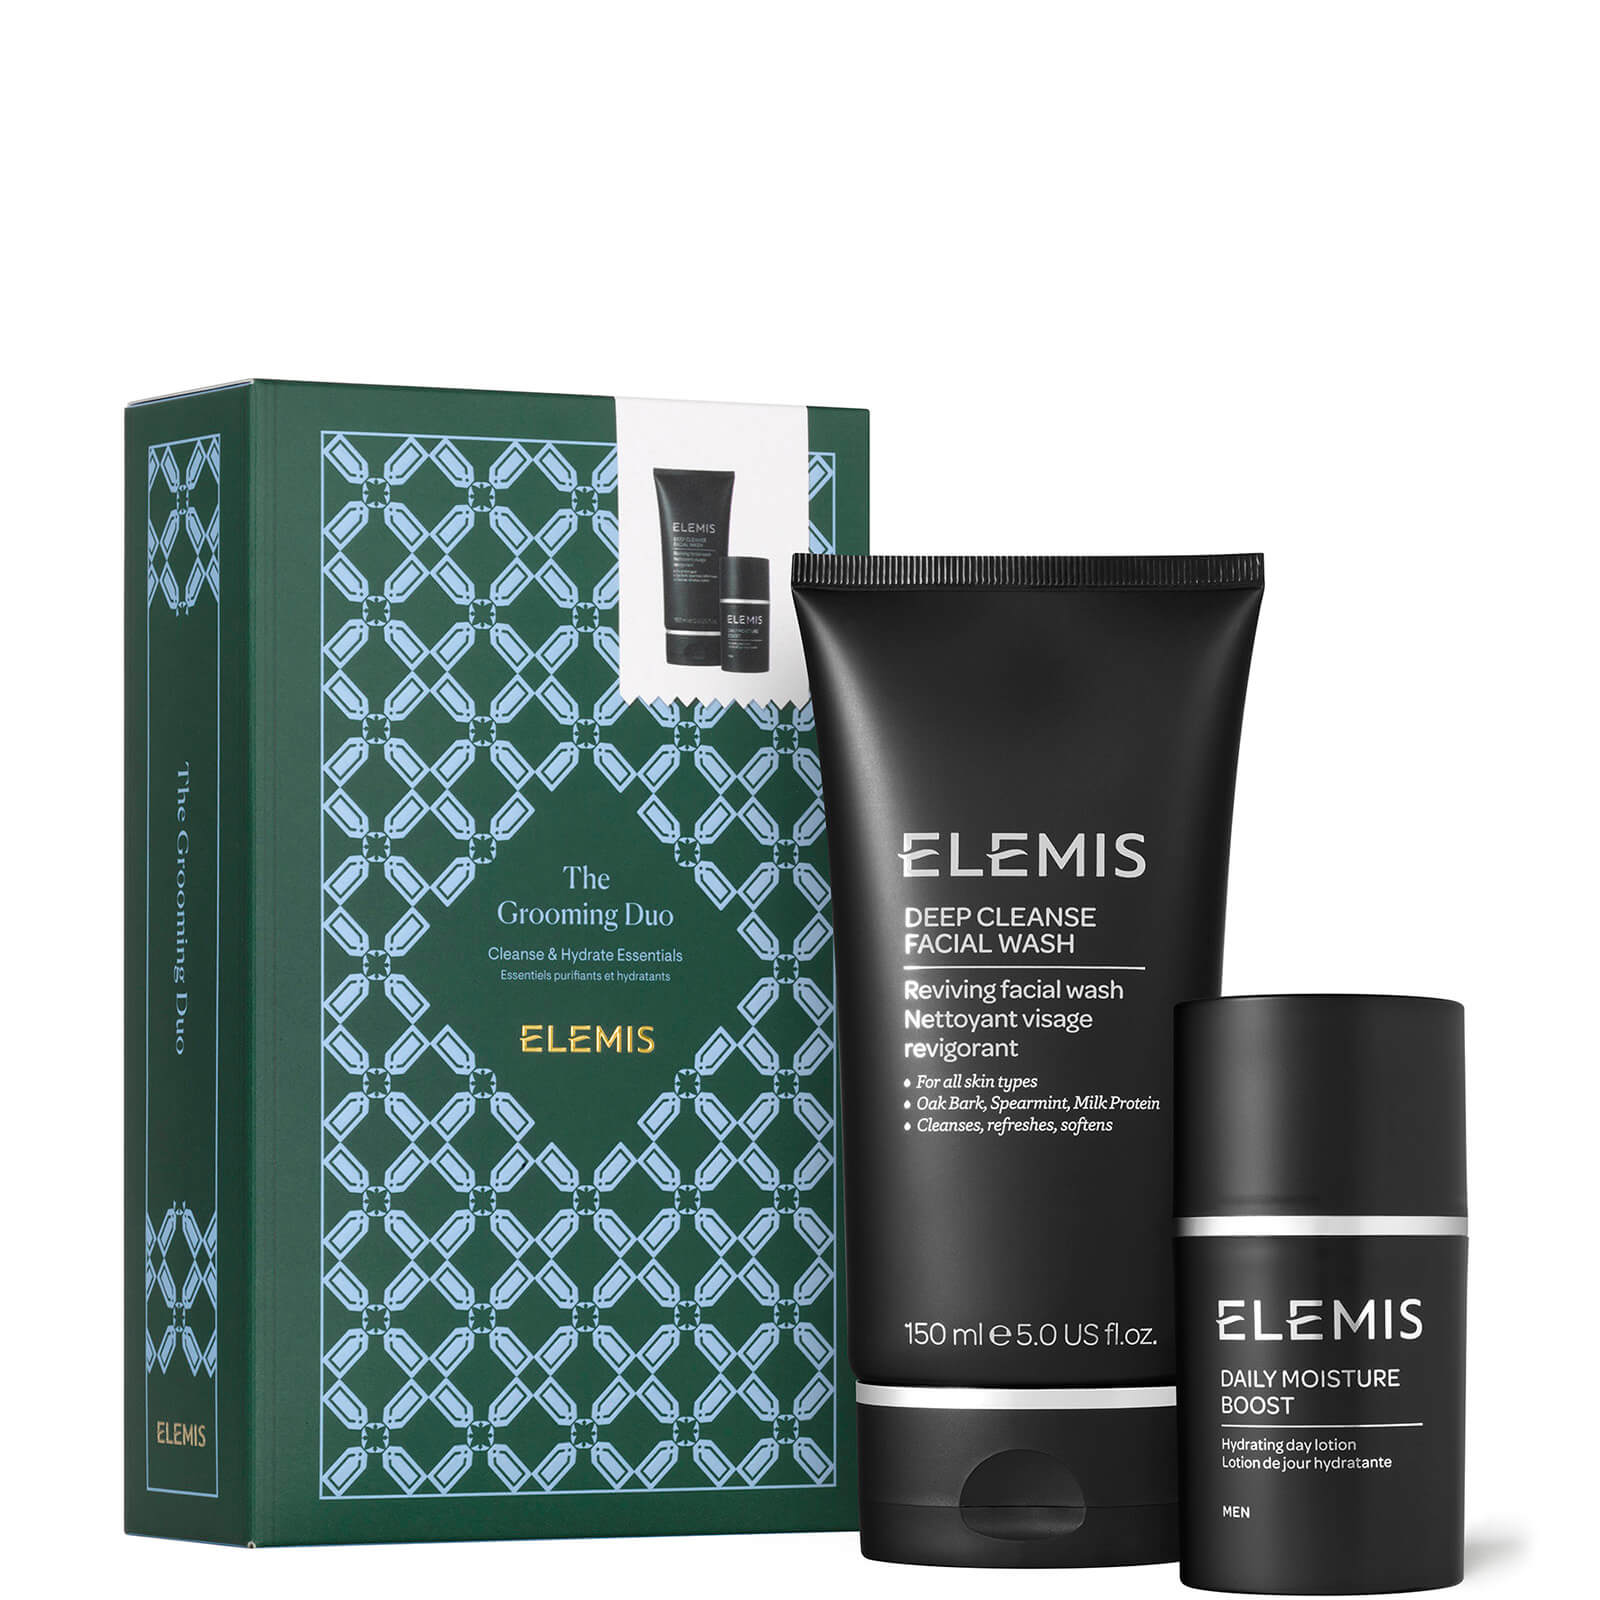 The Grooming Duo Set